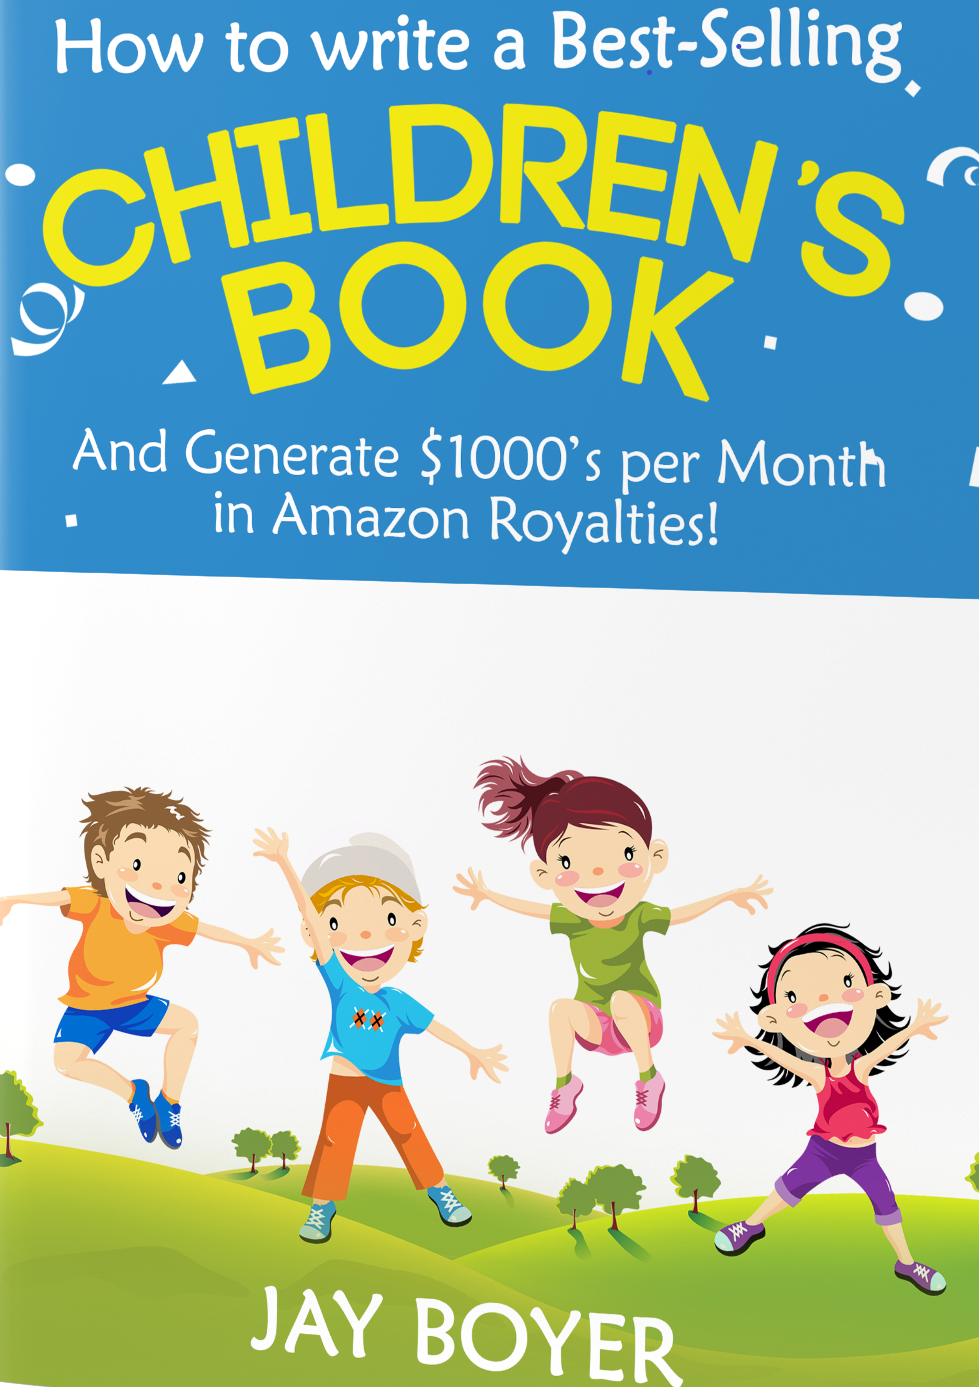 A Proven Guide To Publishing A Bestselling Illustrated Children's Book On Amazon